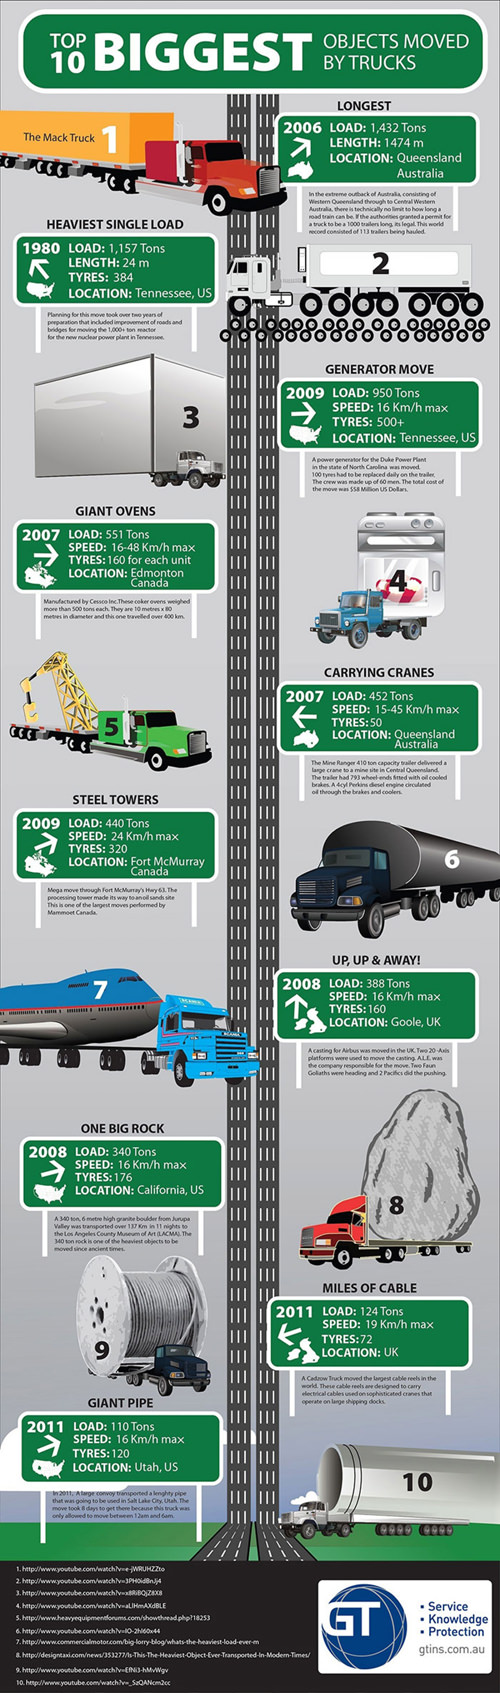 world largest truck moves